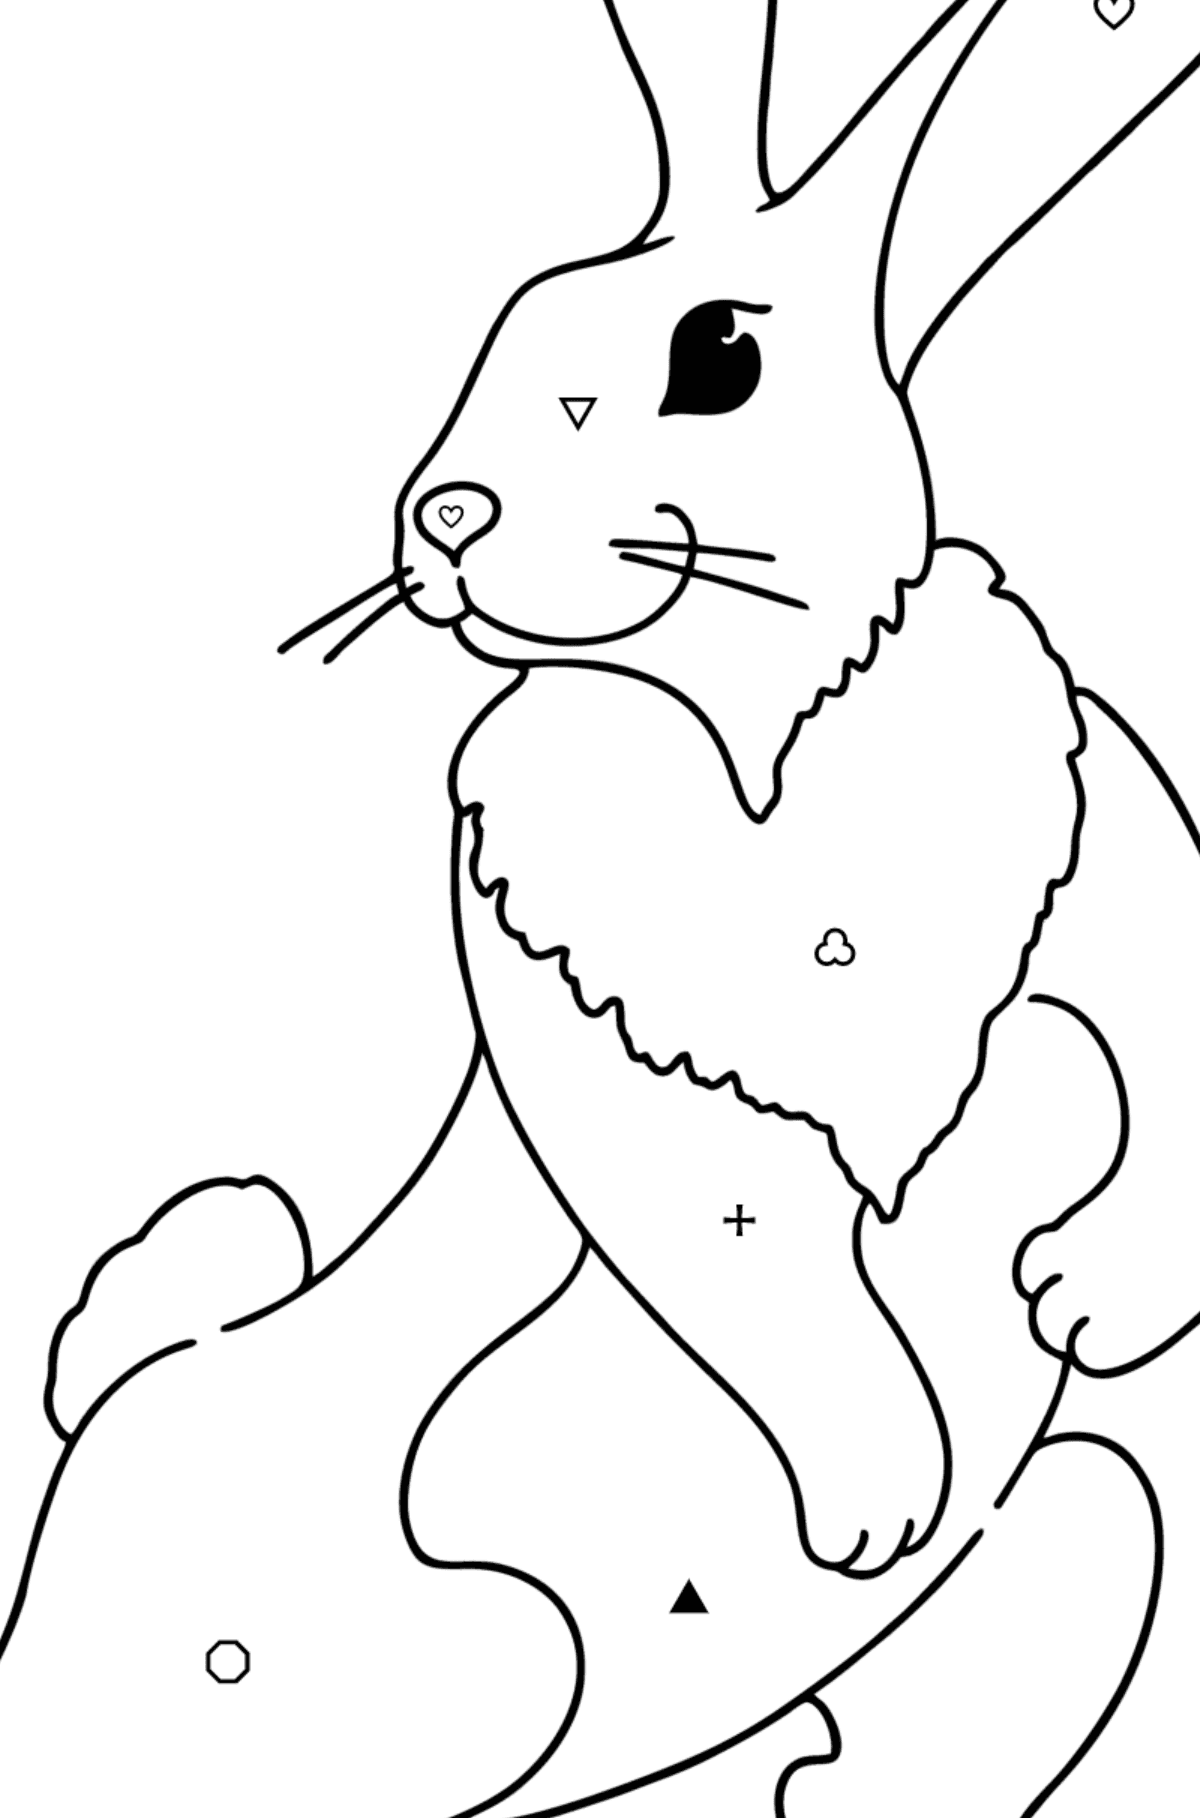 Playful Bunny coloring page - Coloring by Symbols and Geometric Shapes for Kids